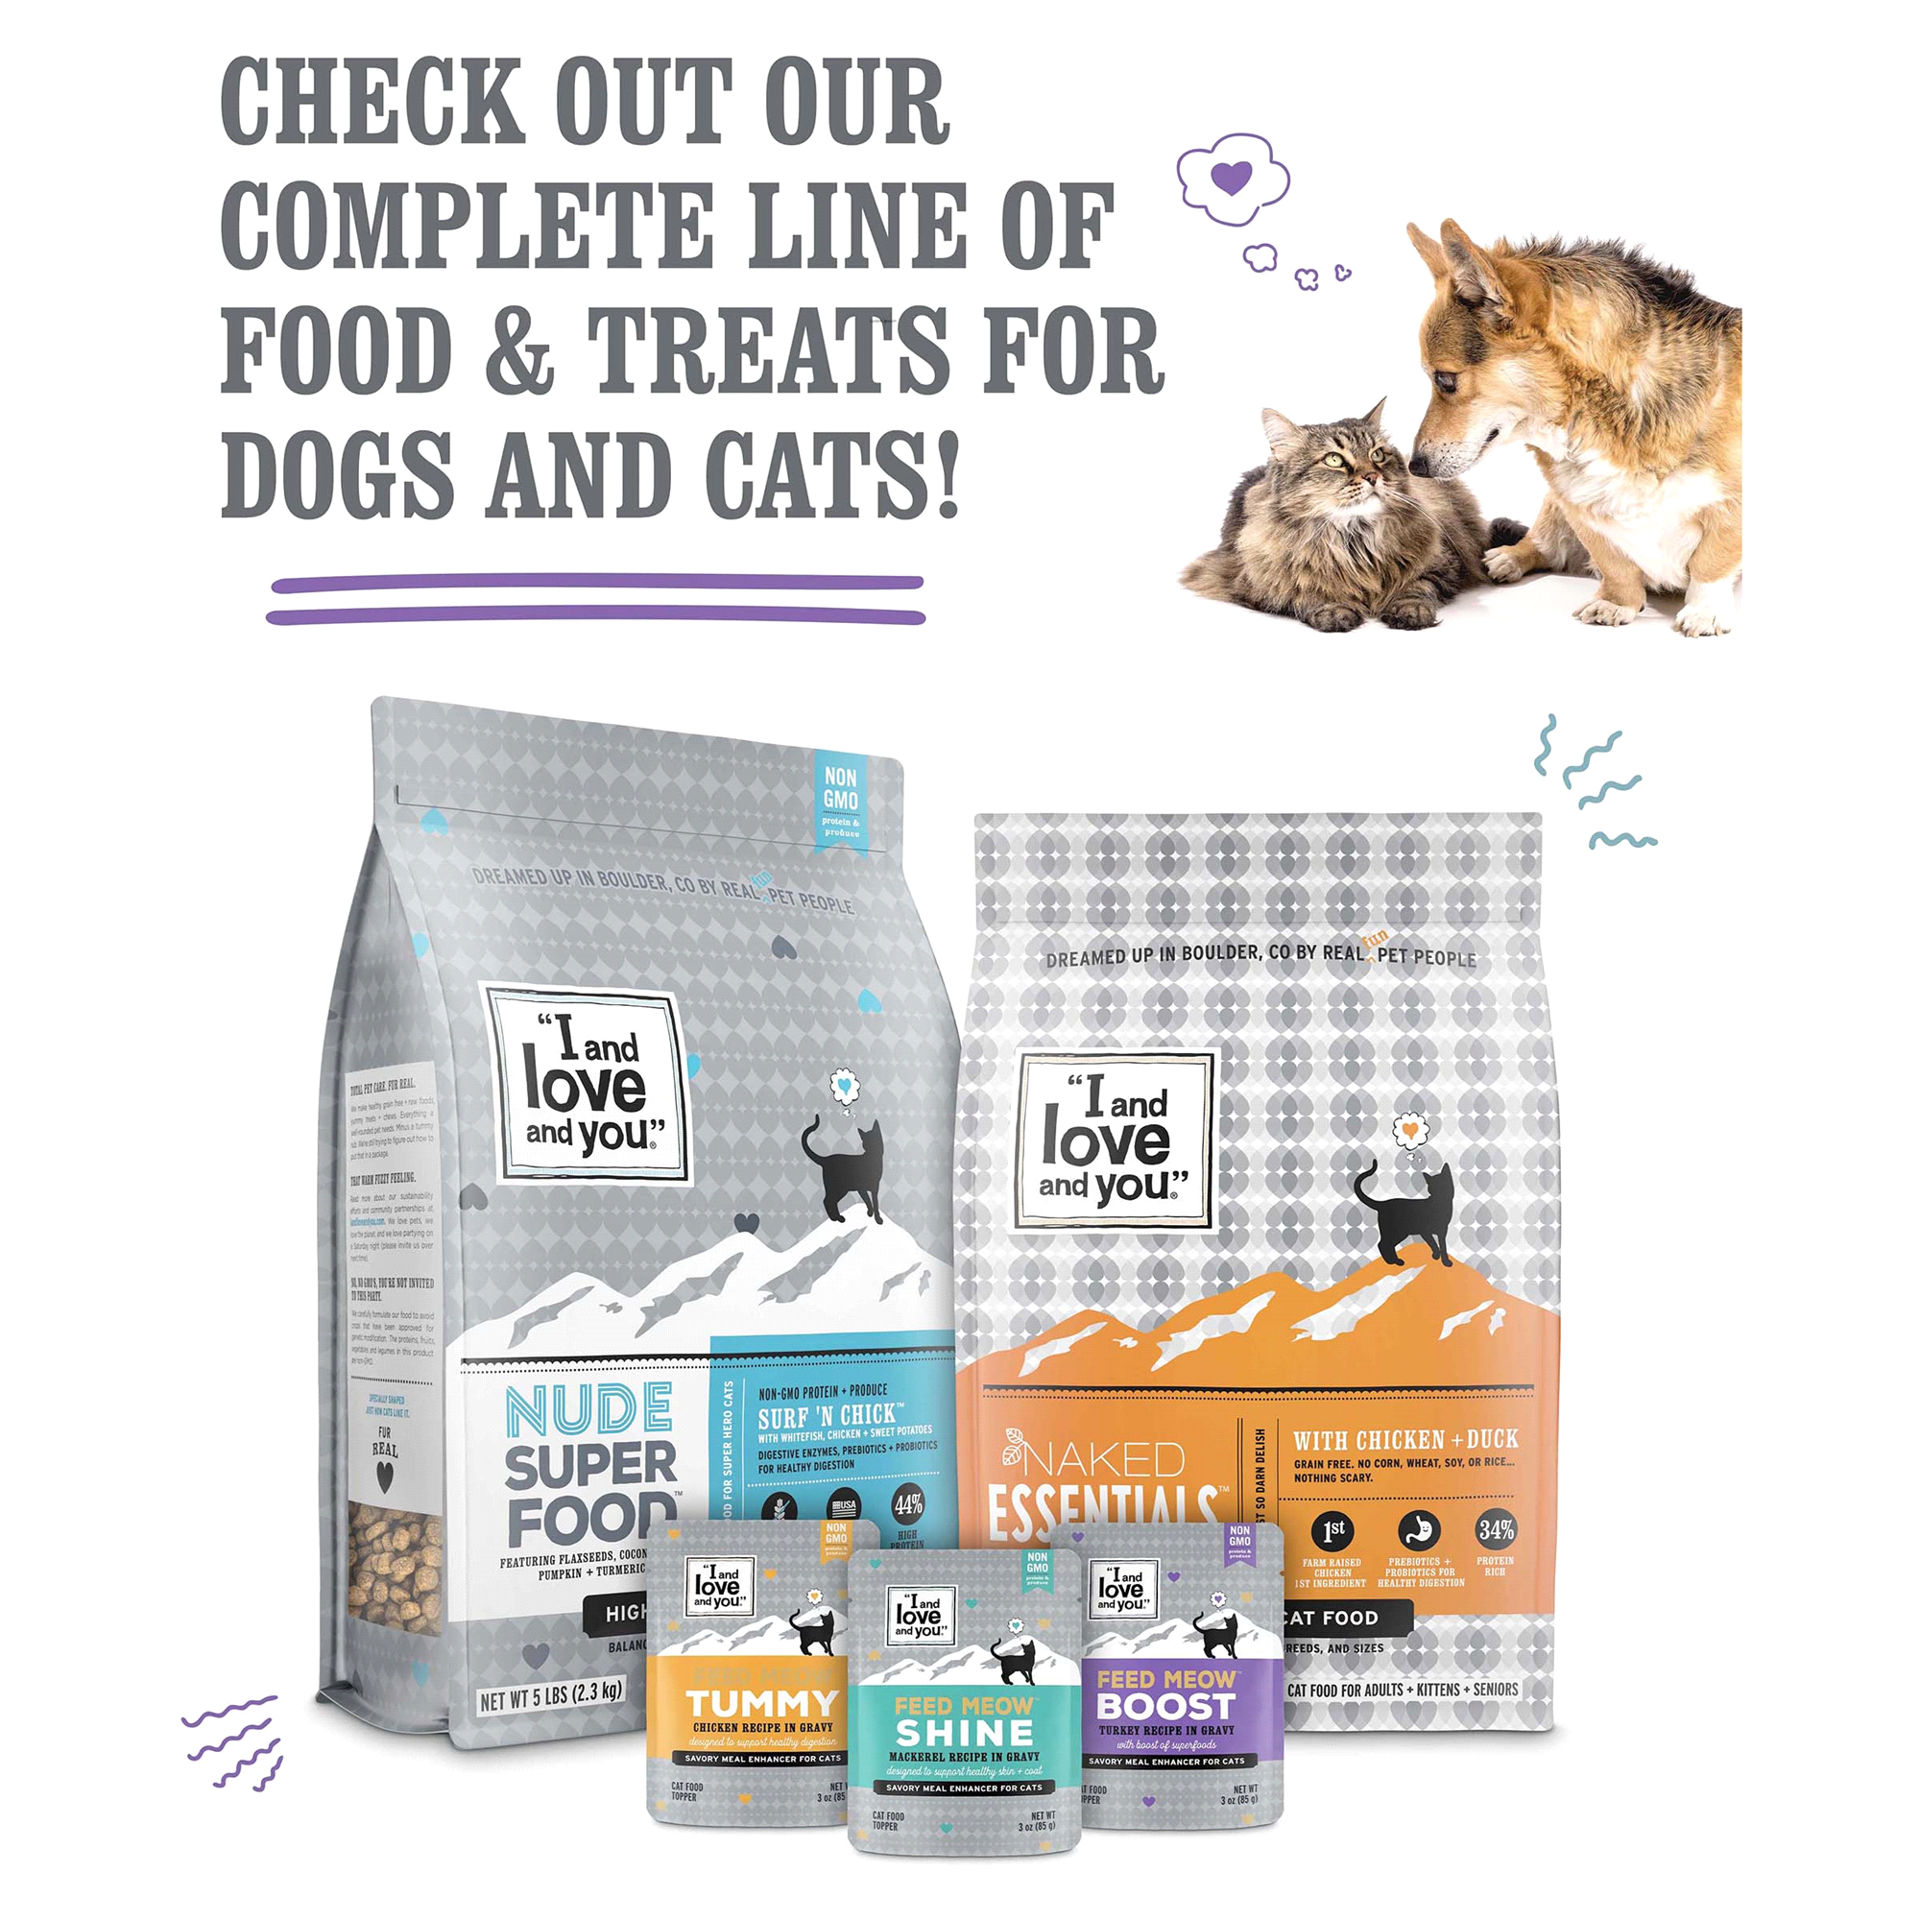 slide 9 of 29, I and Love and You Naked Essentials Salmon and Trout Dry Cat Food, 